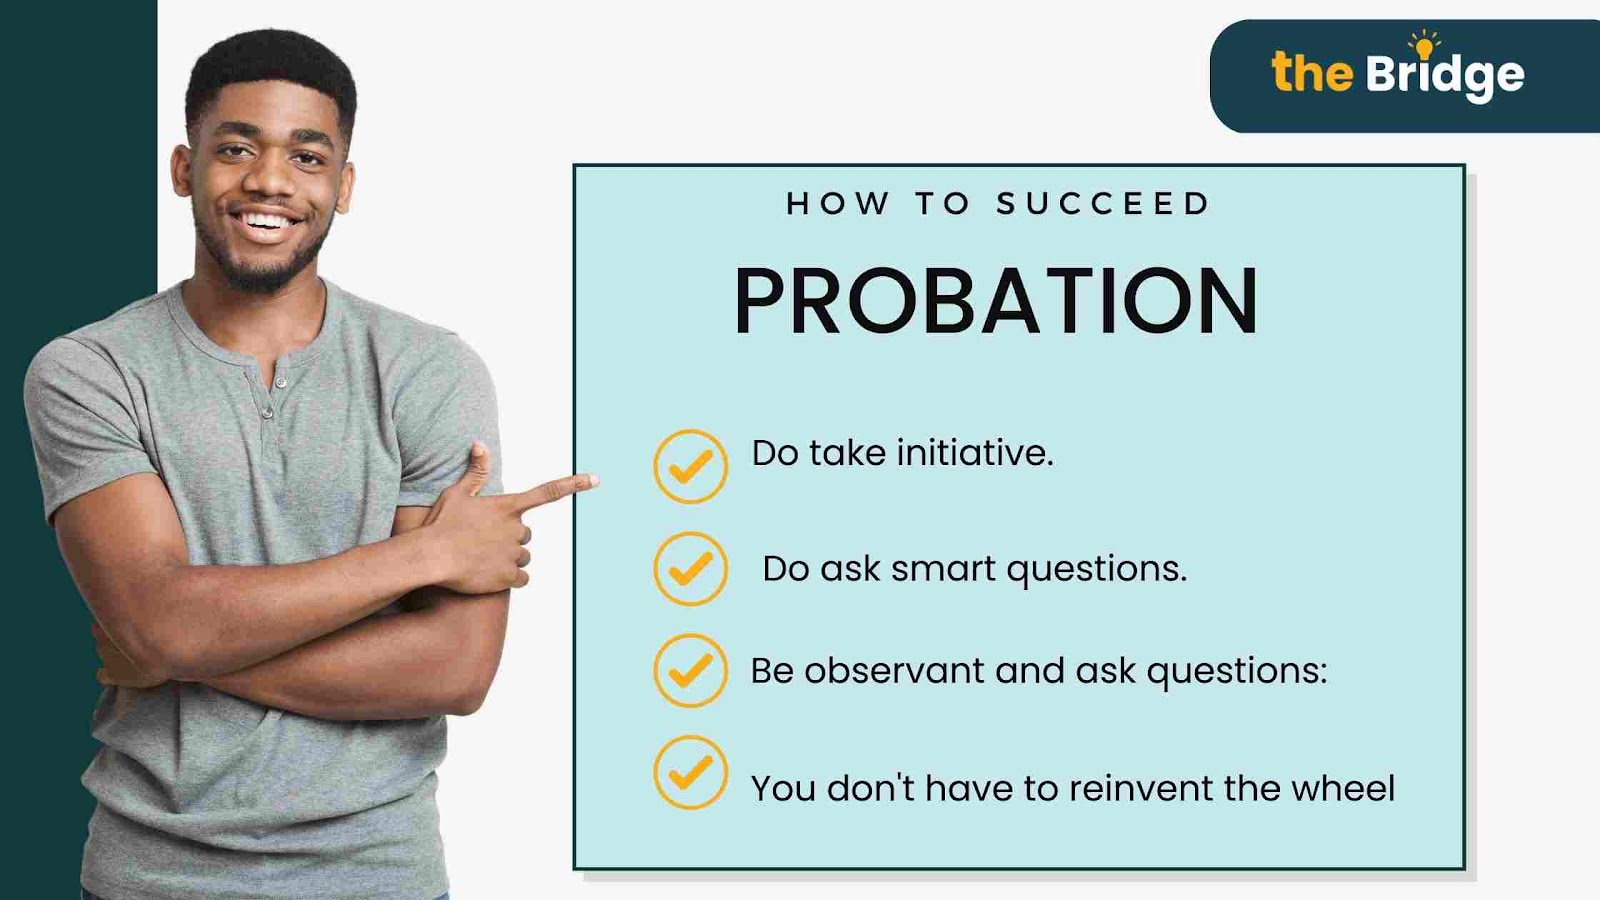 an illustration of tips to succeed probation Period by the Bridge Programm